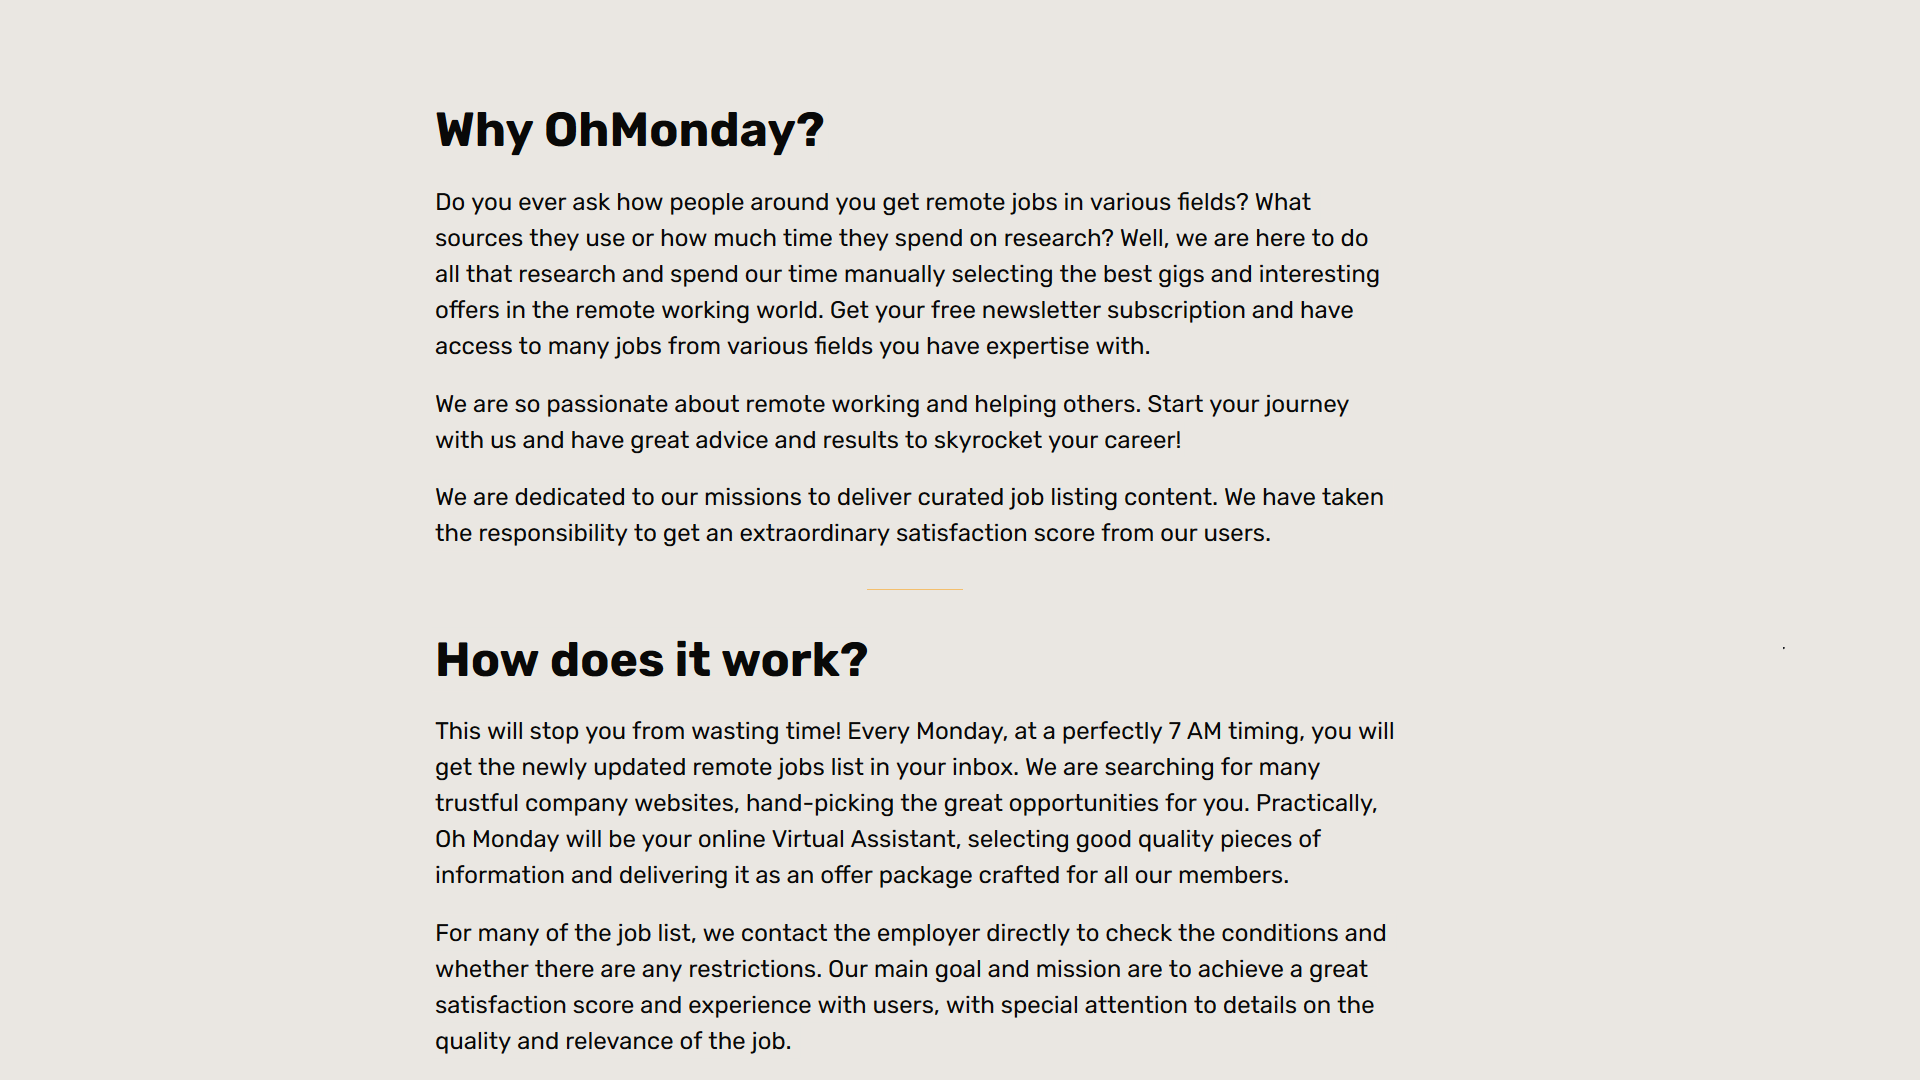 Get feedback from a vast remote working audience about OhMonday.co